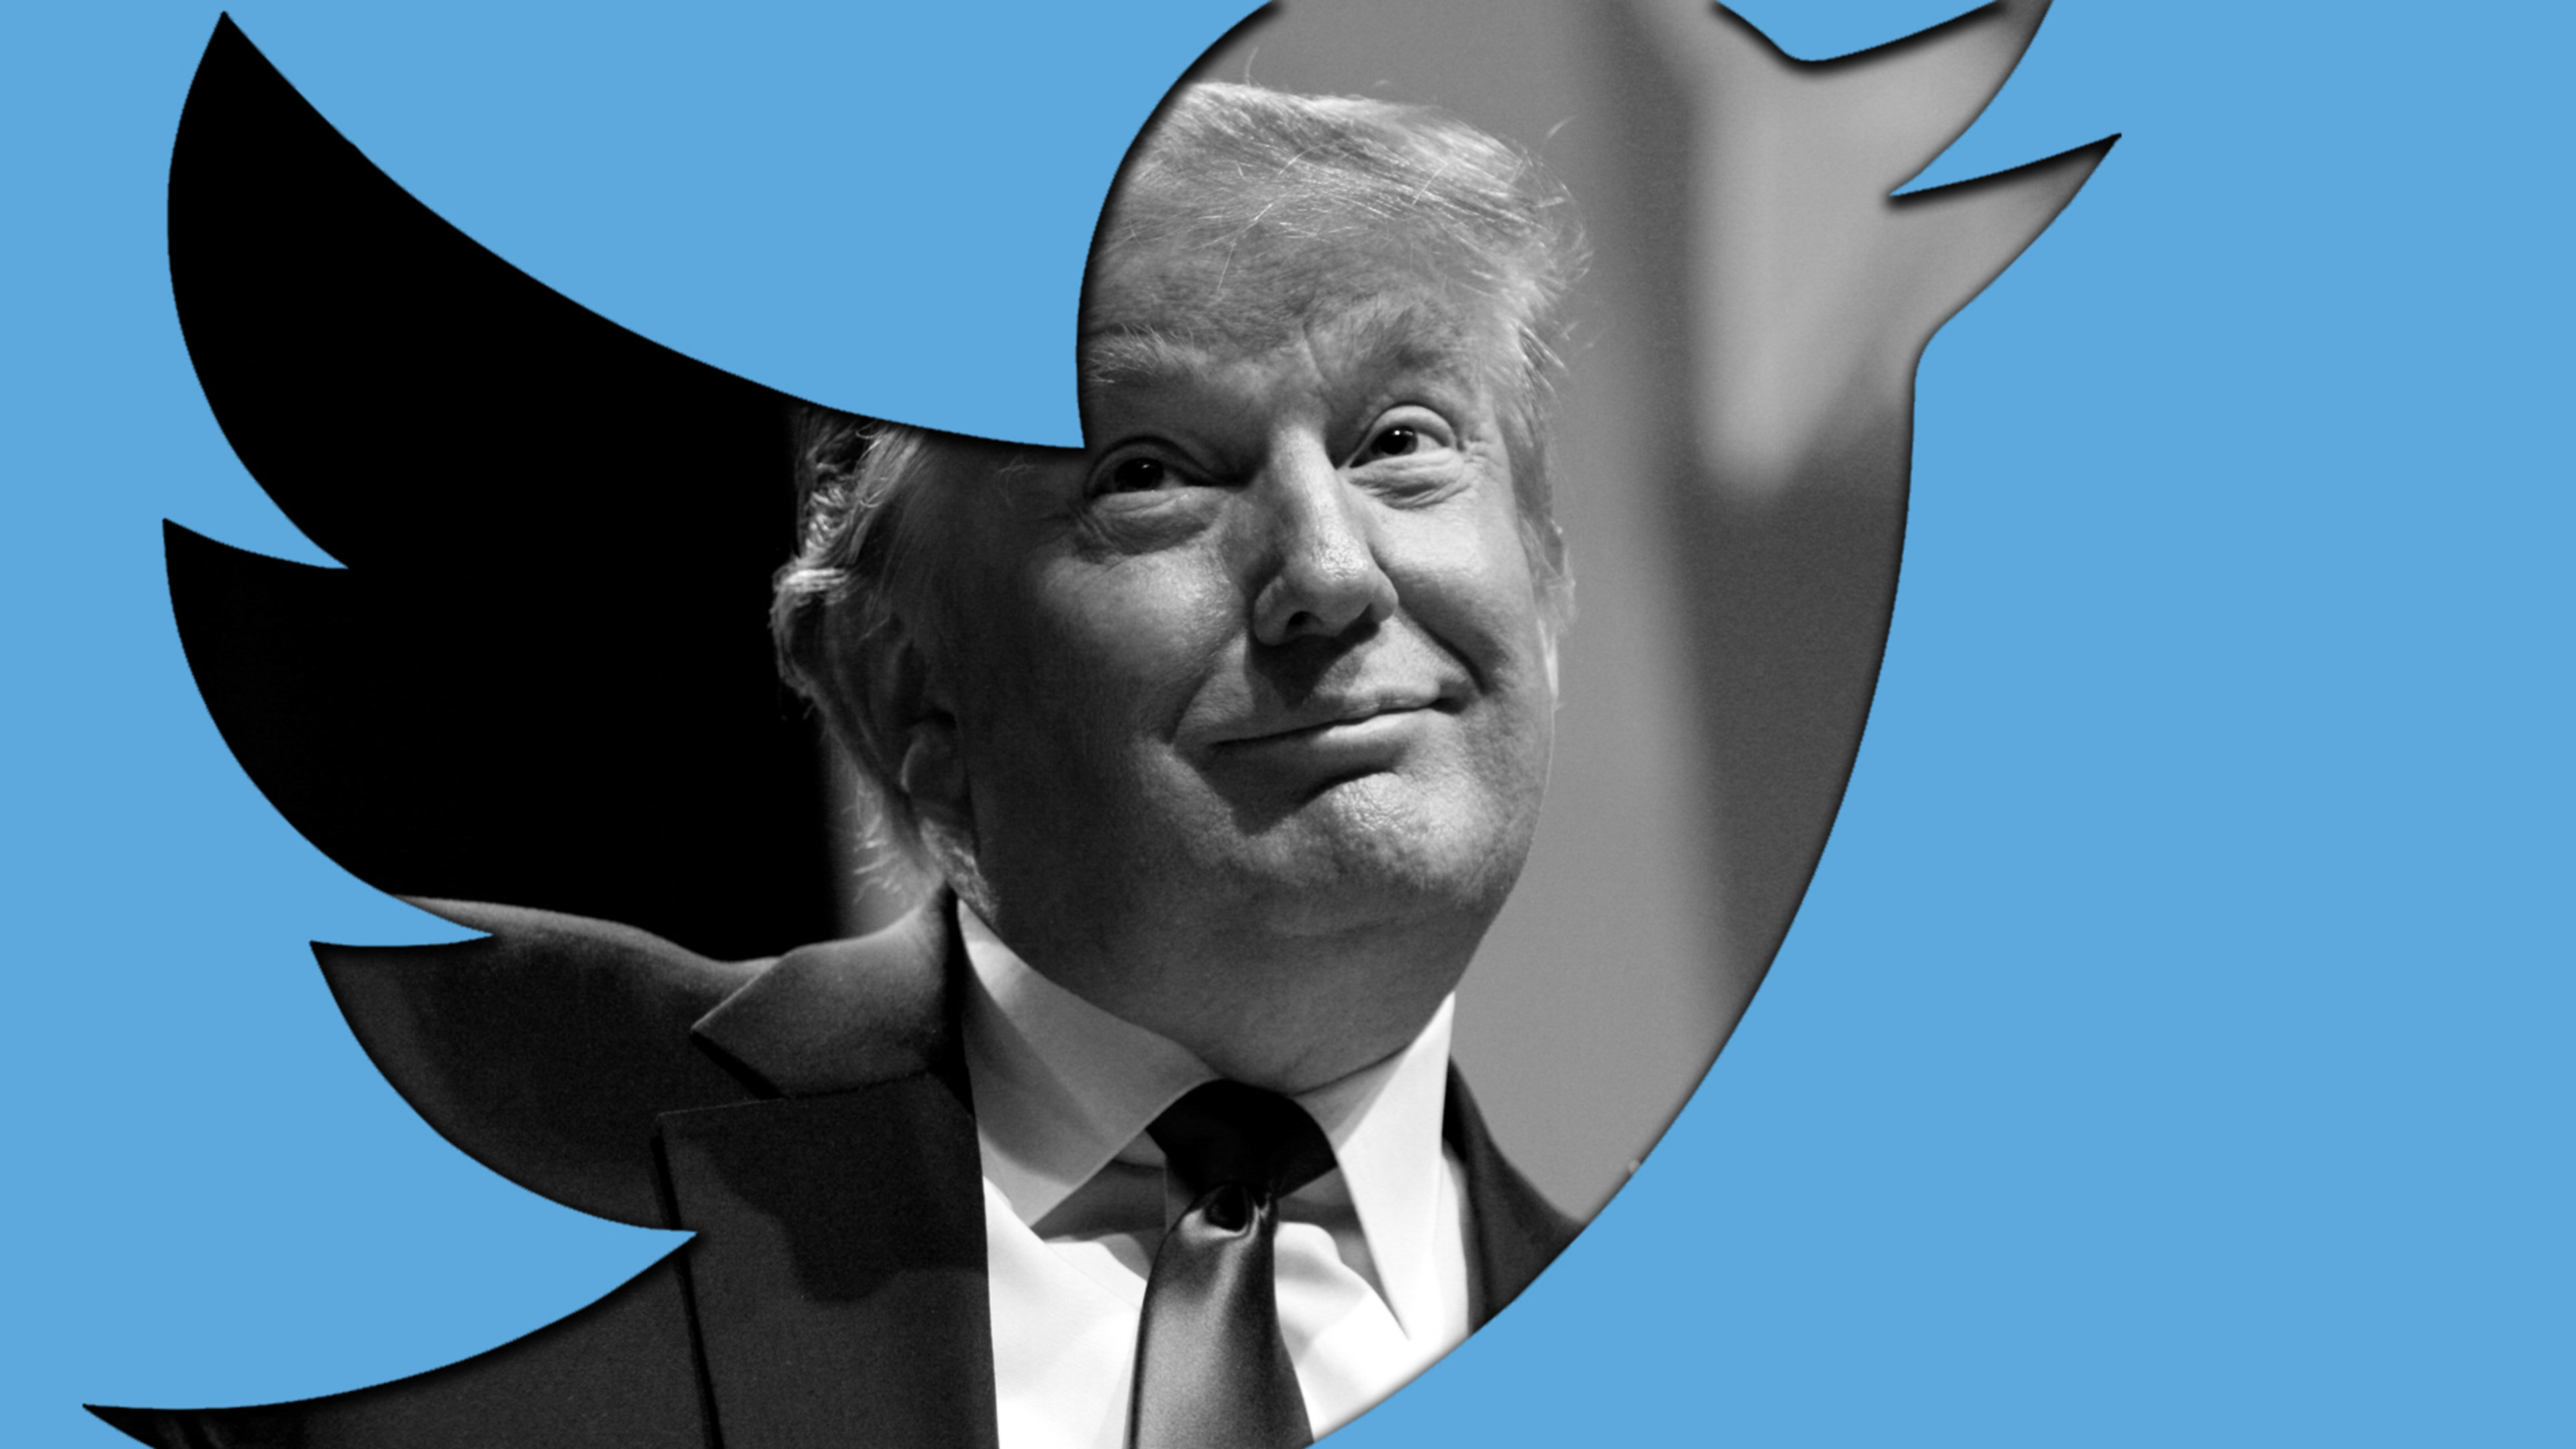 Twitter offers the perfect answers to Trump’s “What do I know about branding?”